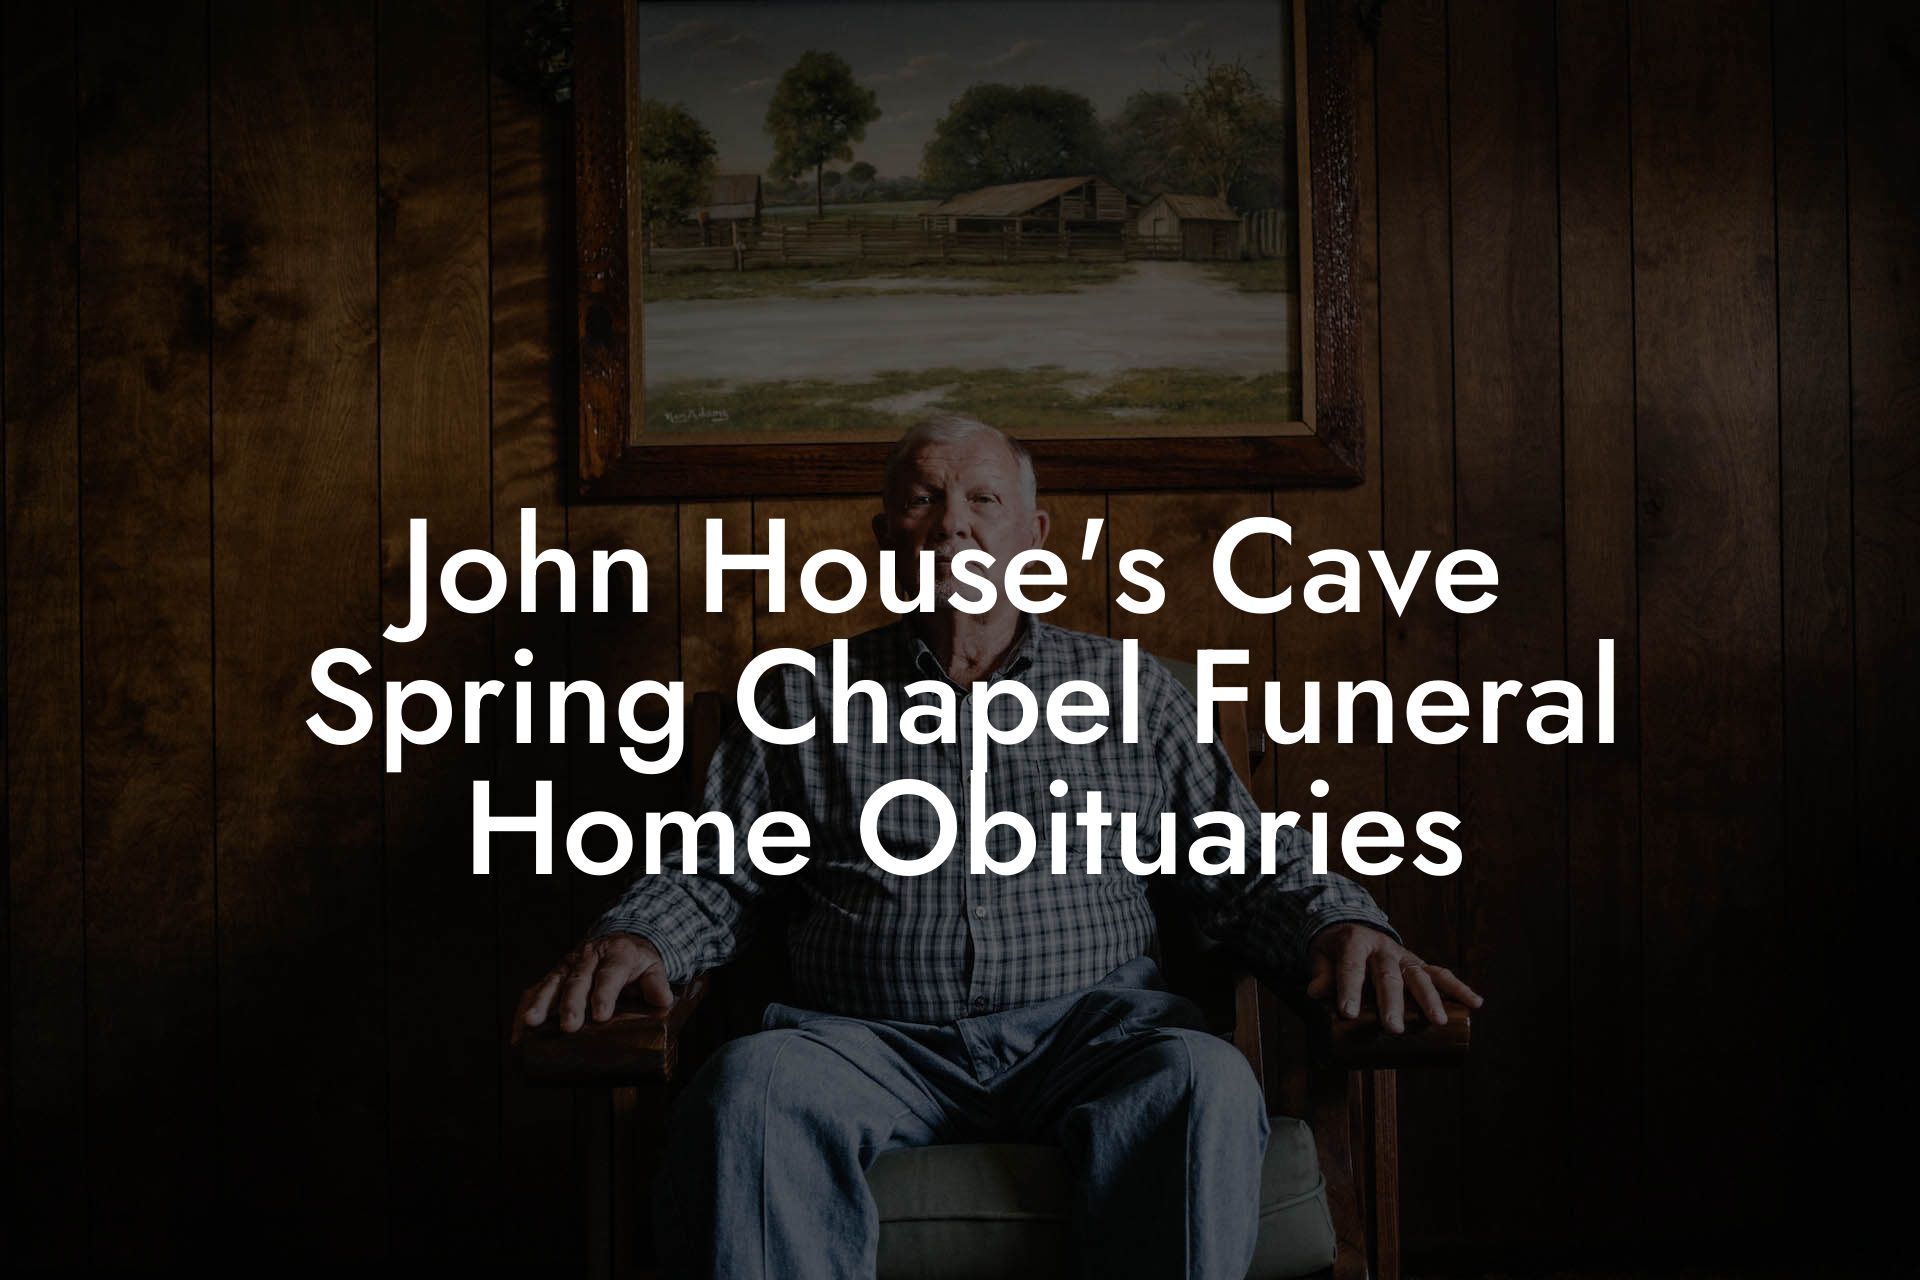 John House's Cave Spring Chapel Funeral Home Obituaries